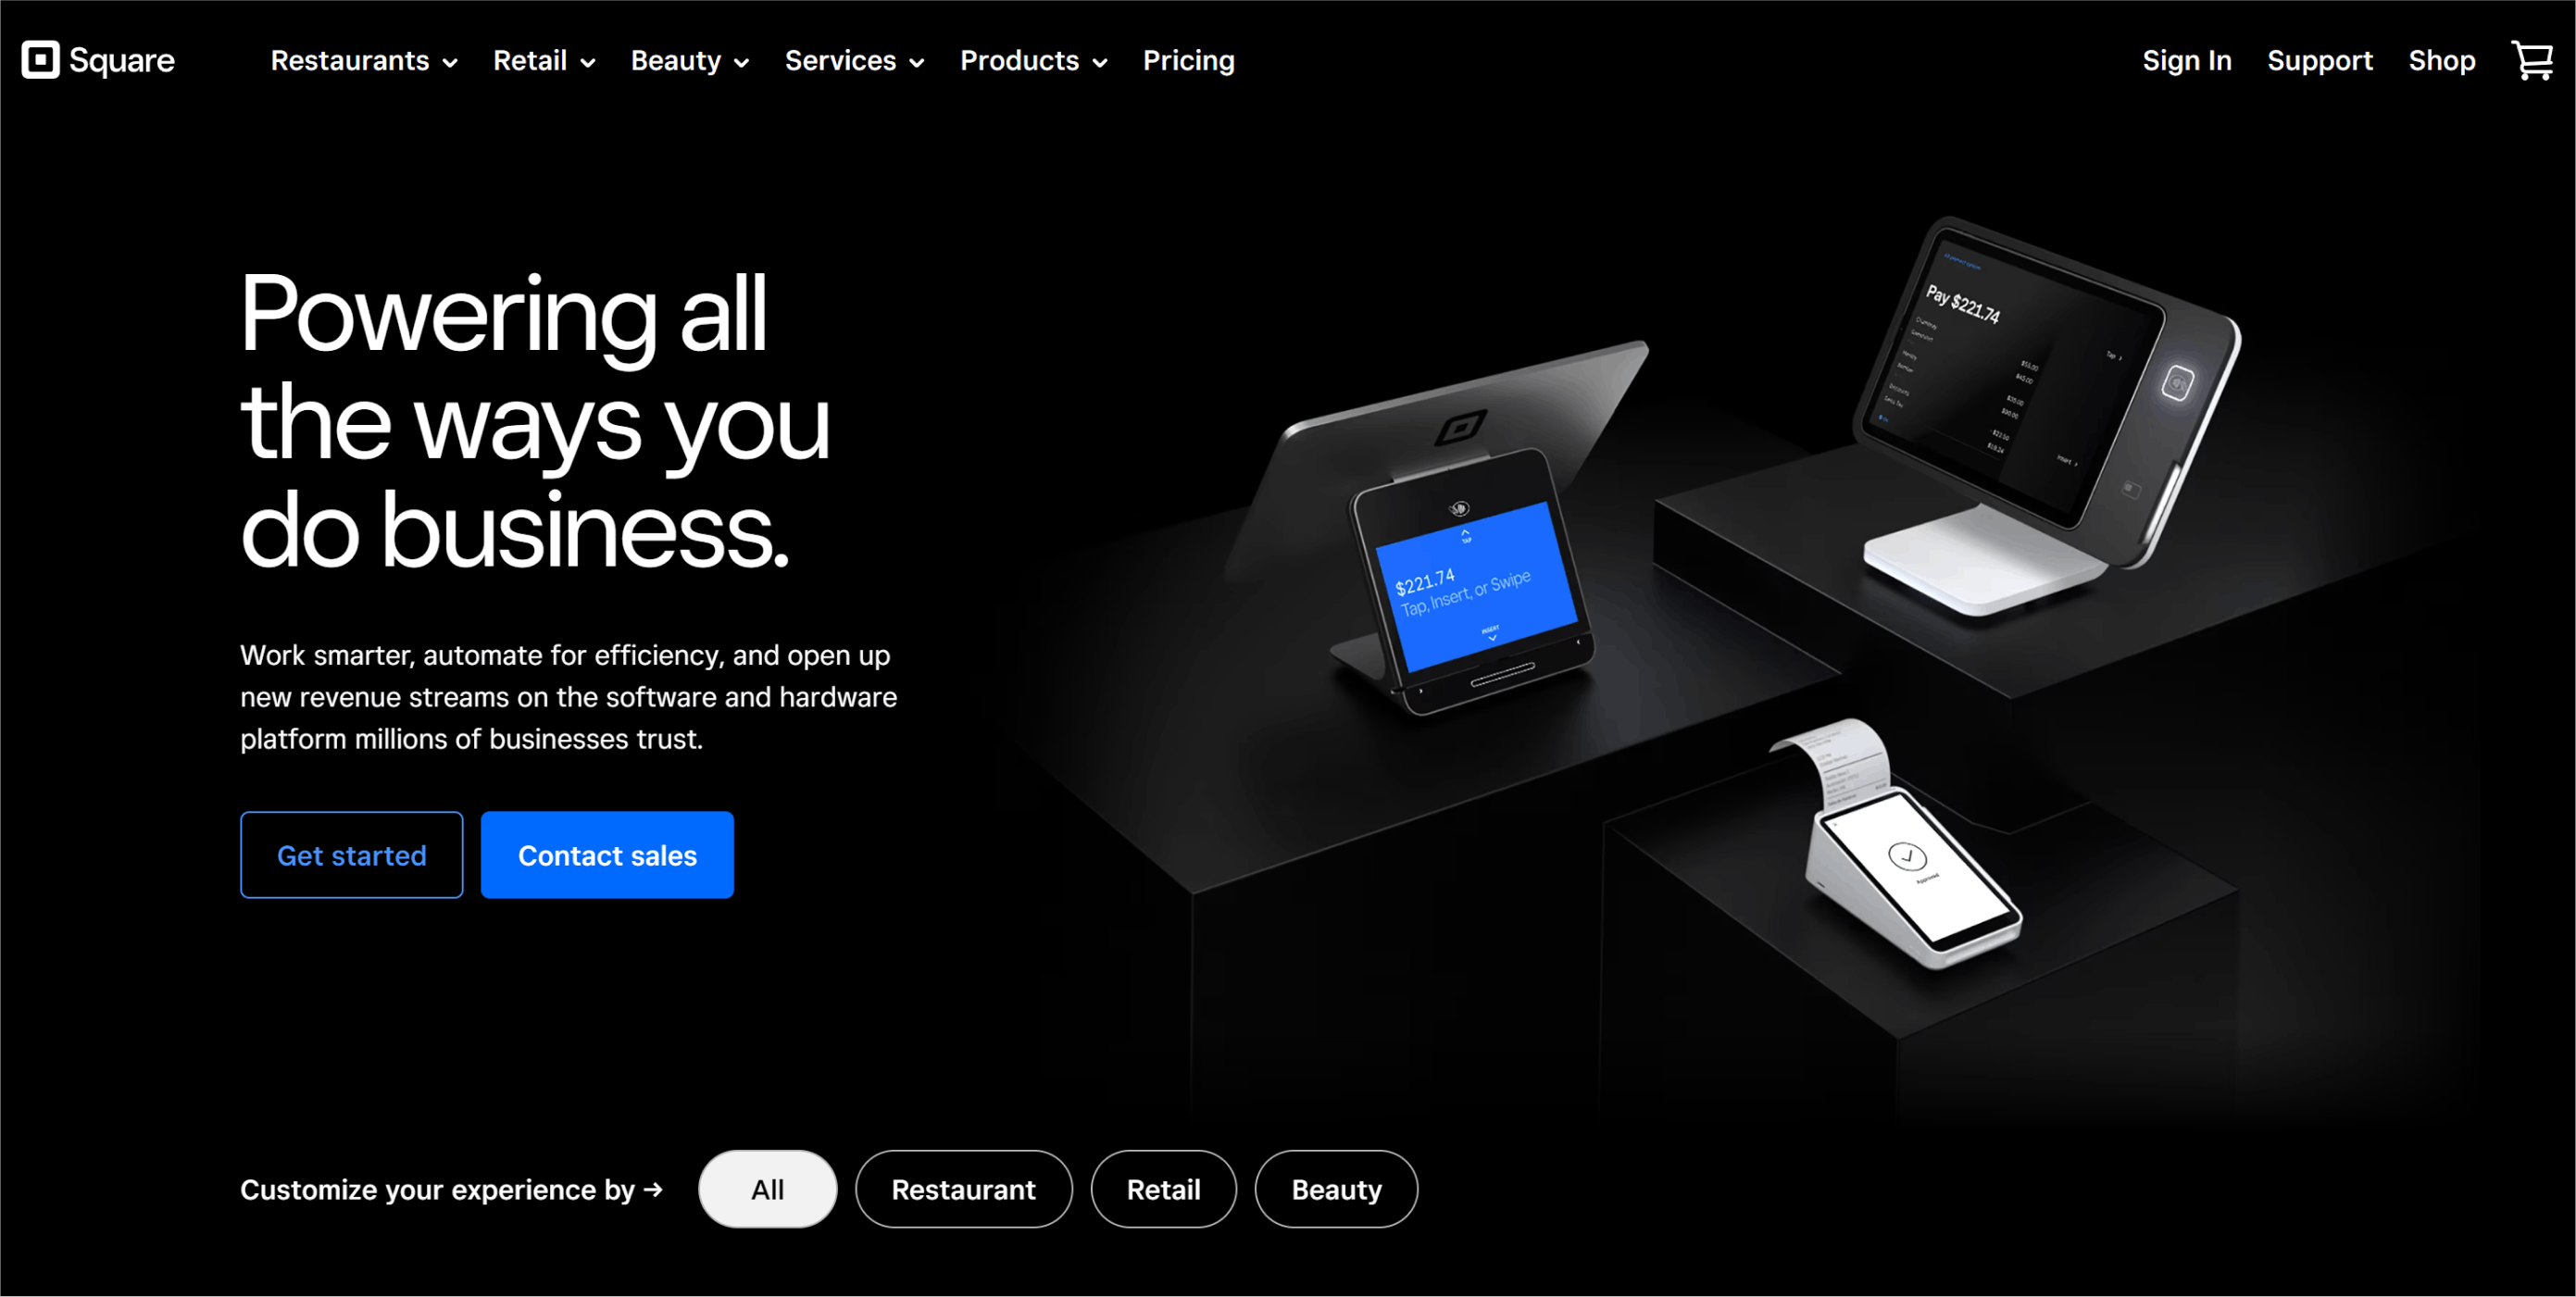 The Square homepage